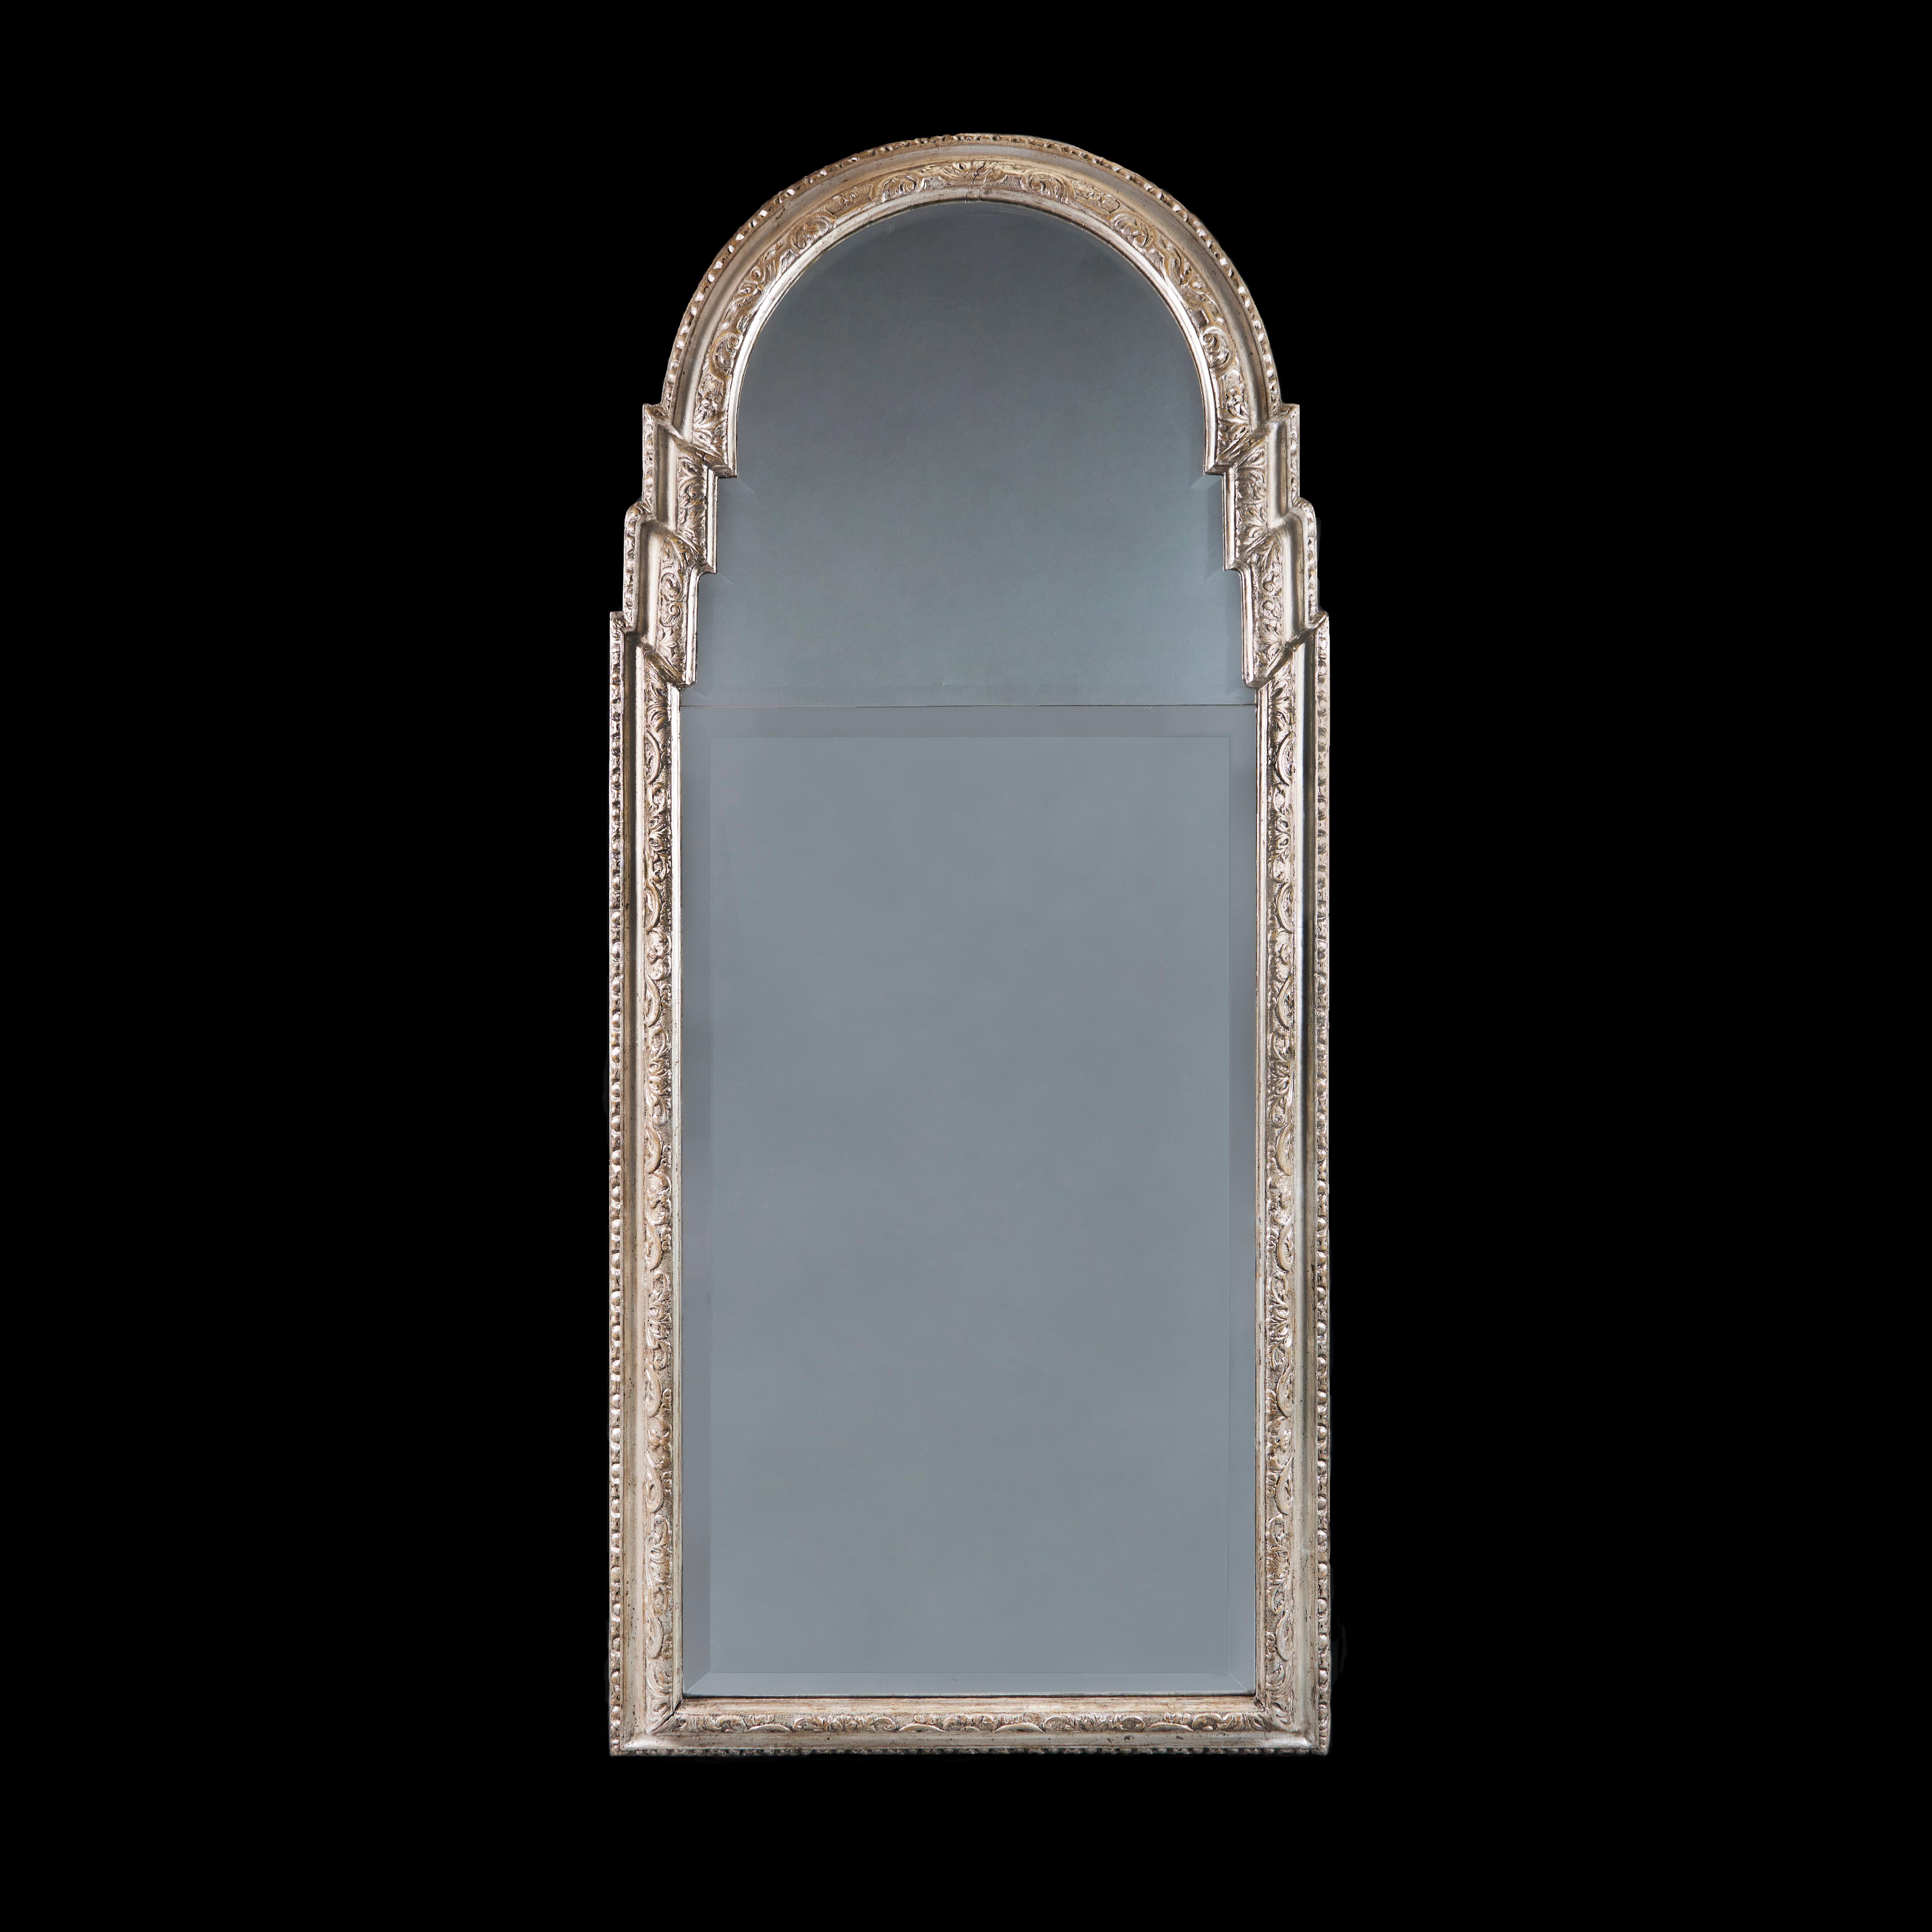 England, circa 1780

A fine late eighteenth century silver gilt pier mirror with mercury glass split splate with bevelled edges, the frame carved with foliate designs and punched decorated, egg and dart borders to the outer edge, with arched